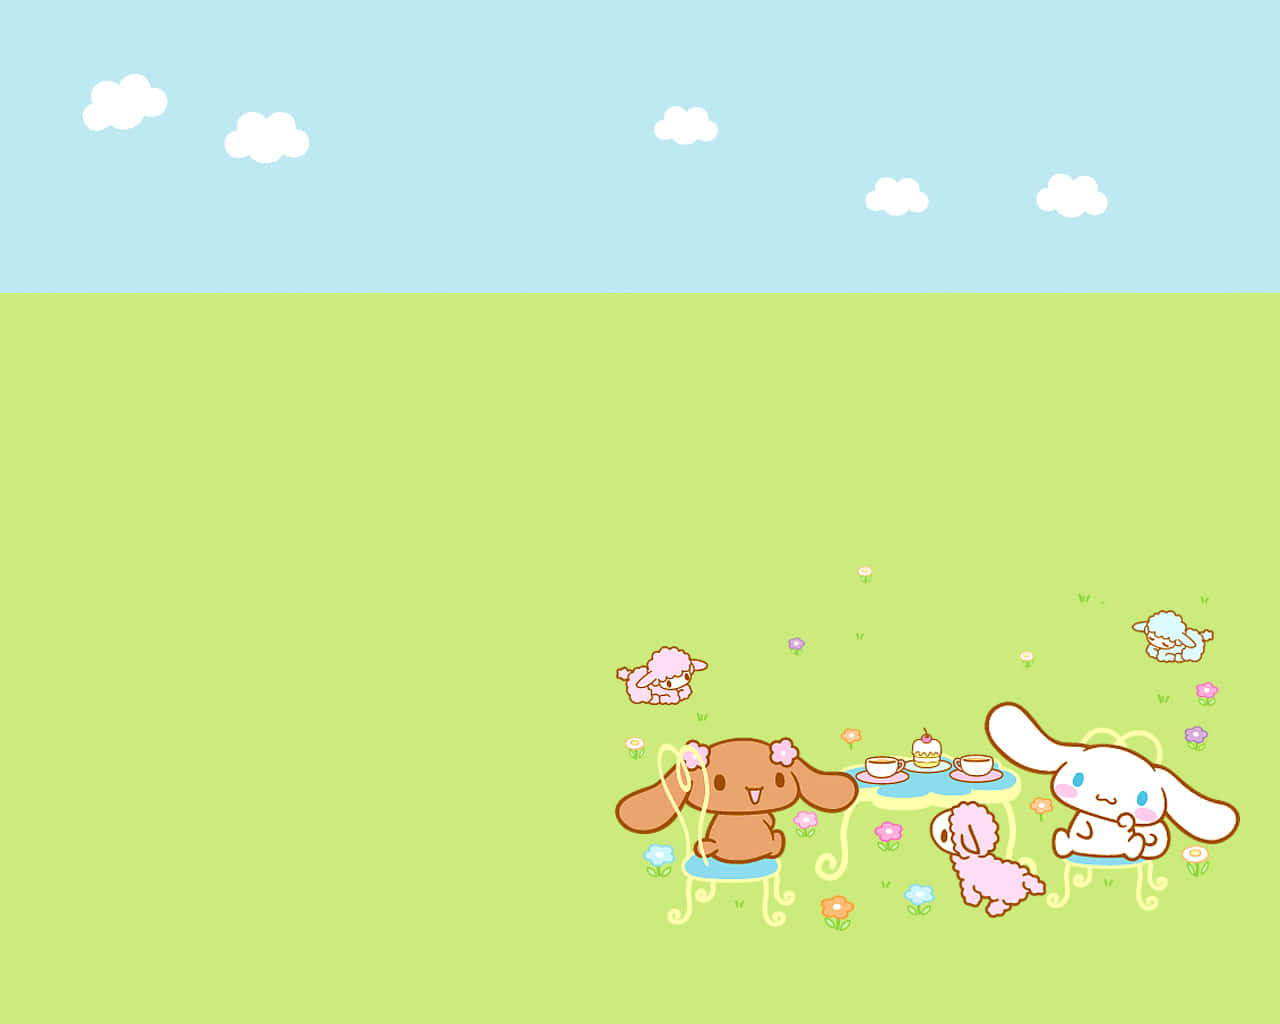 Take a break from reality and dream with Cinnamoroll Desktop Wallpaper